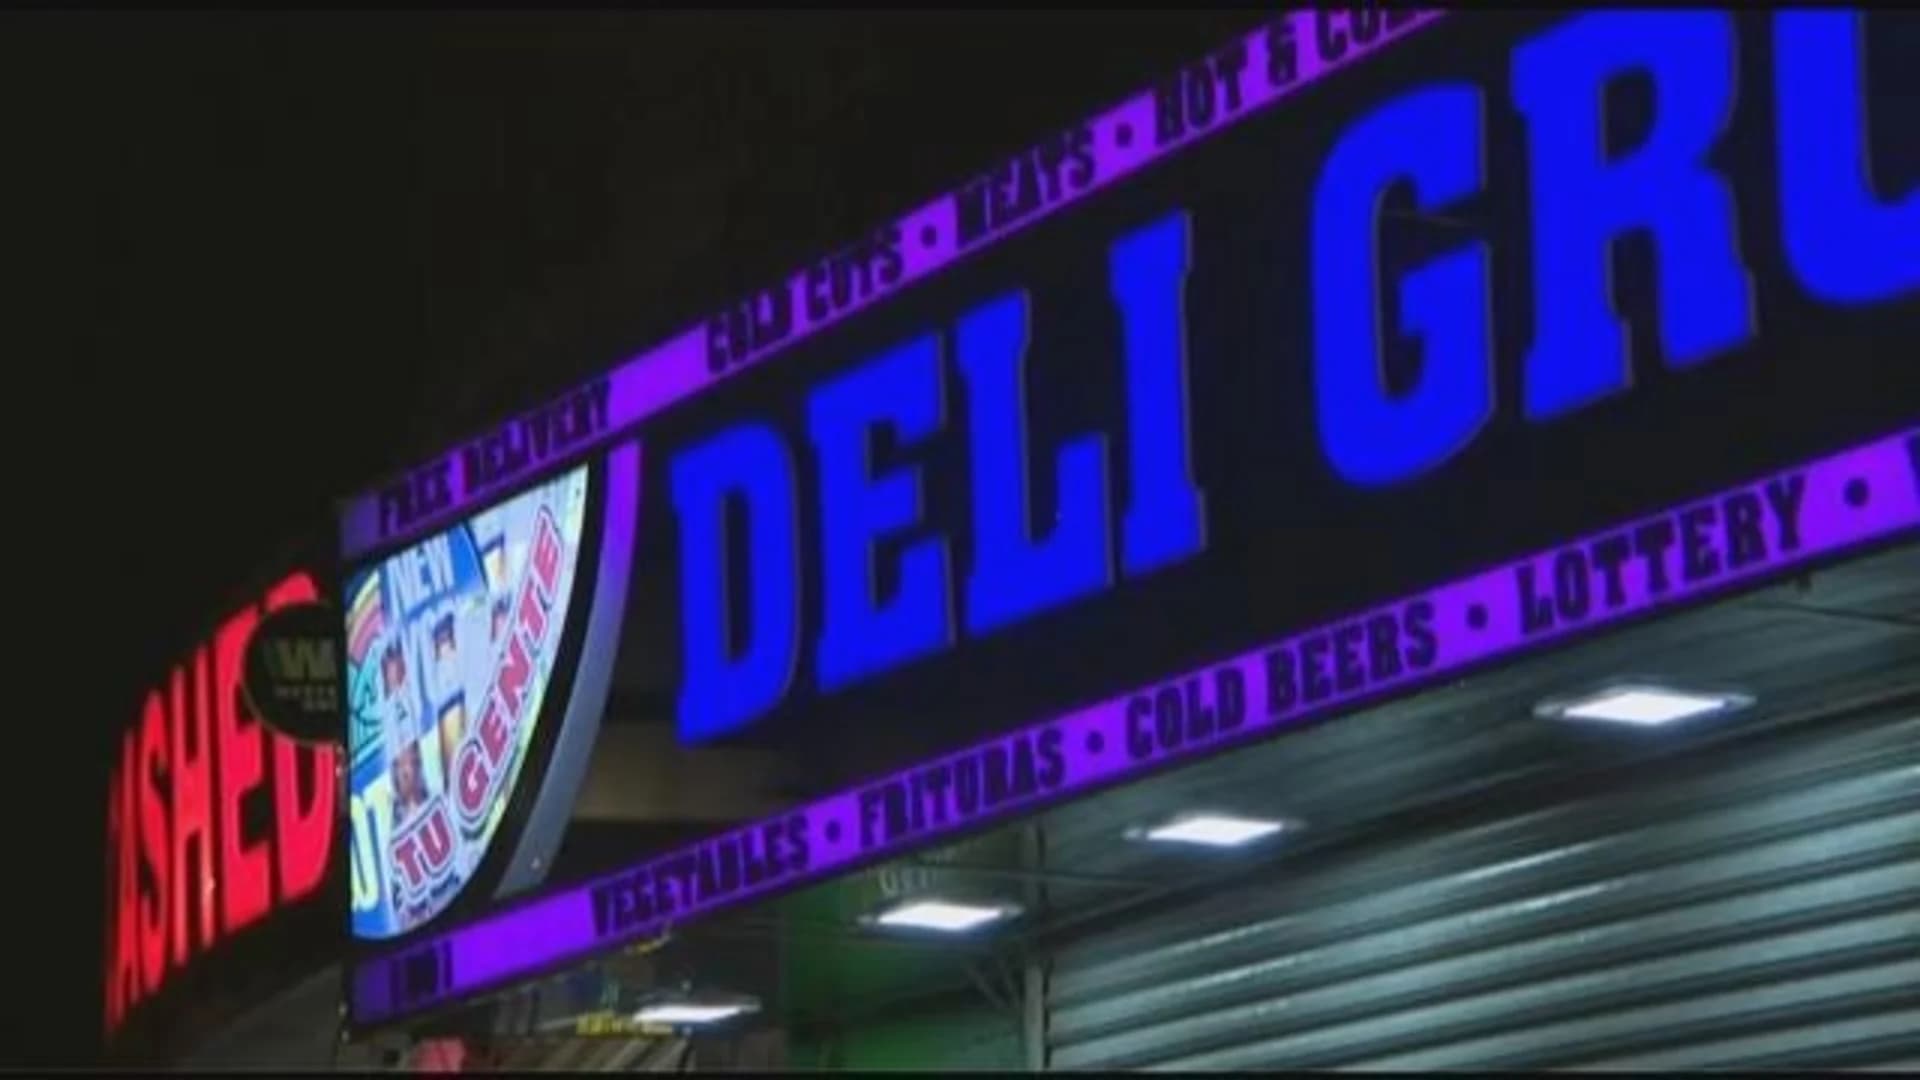 Man slashes bodega employee in the face after trying to steal soft drinks